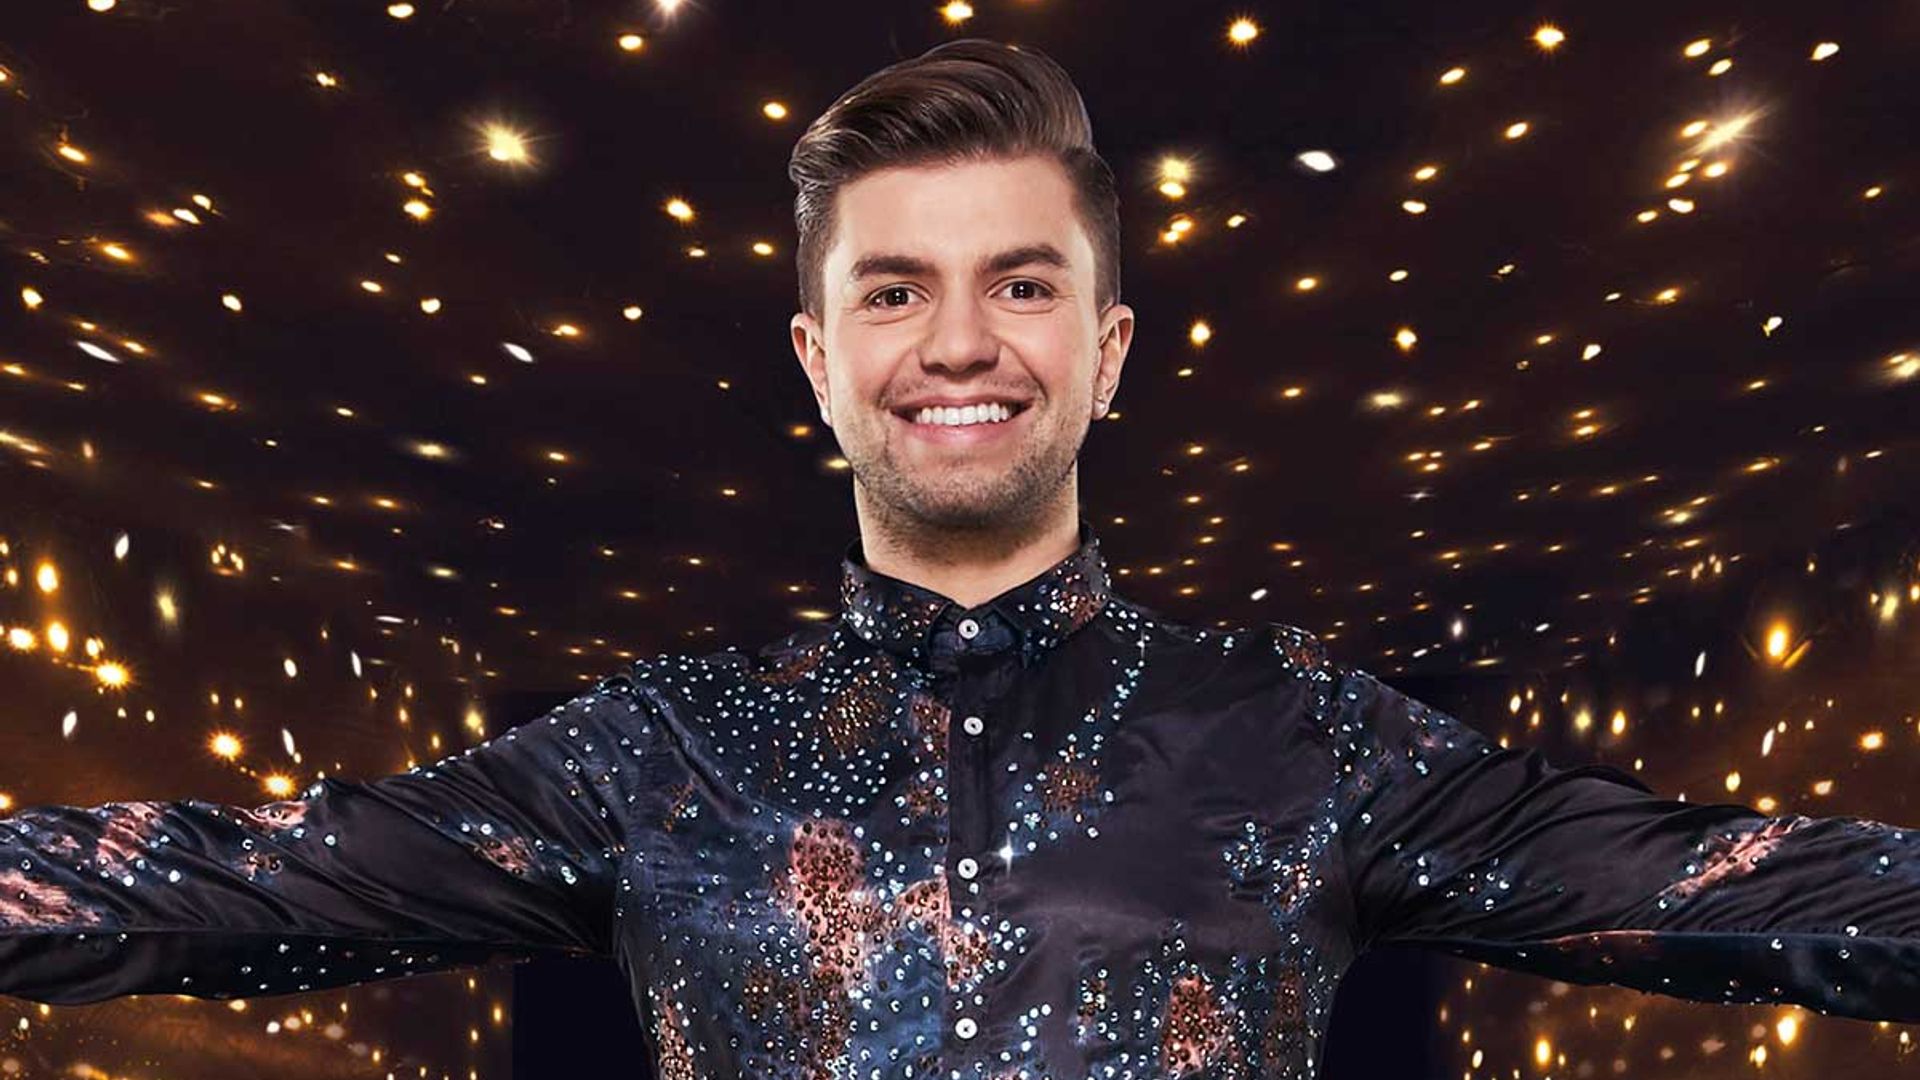 sonny jay dancing on ice